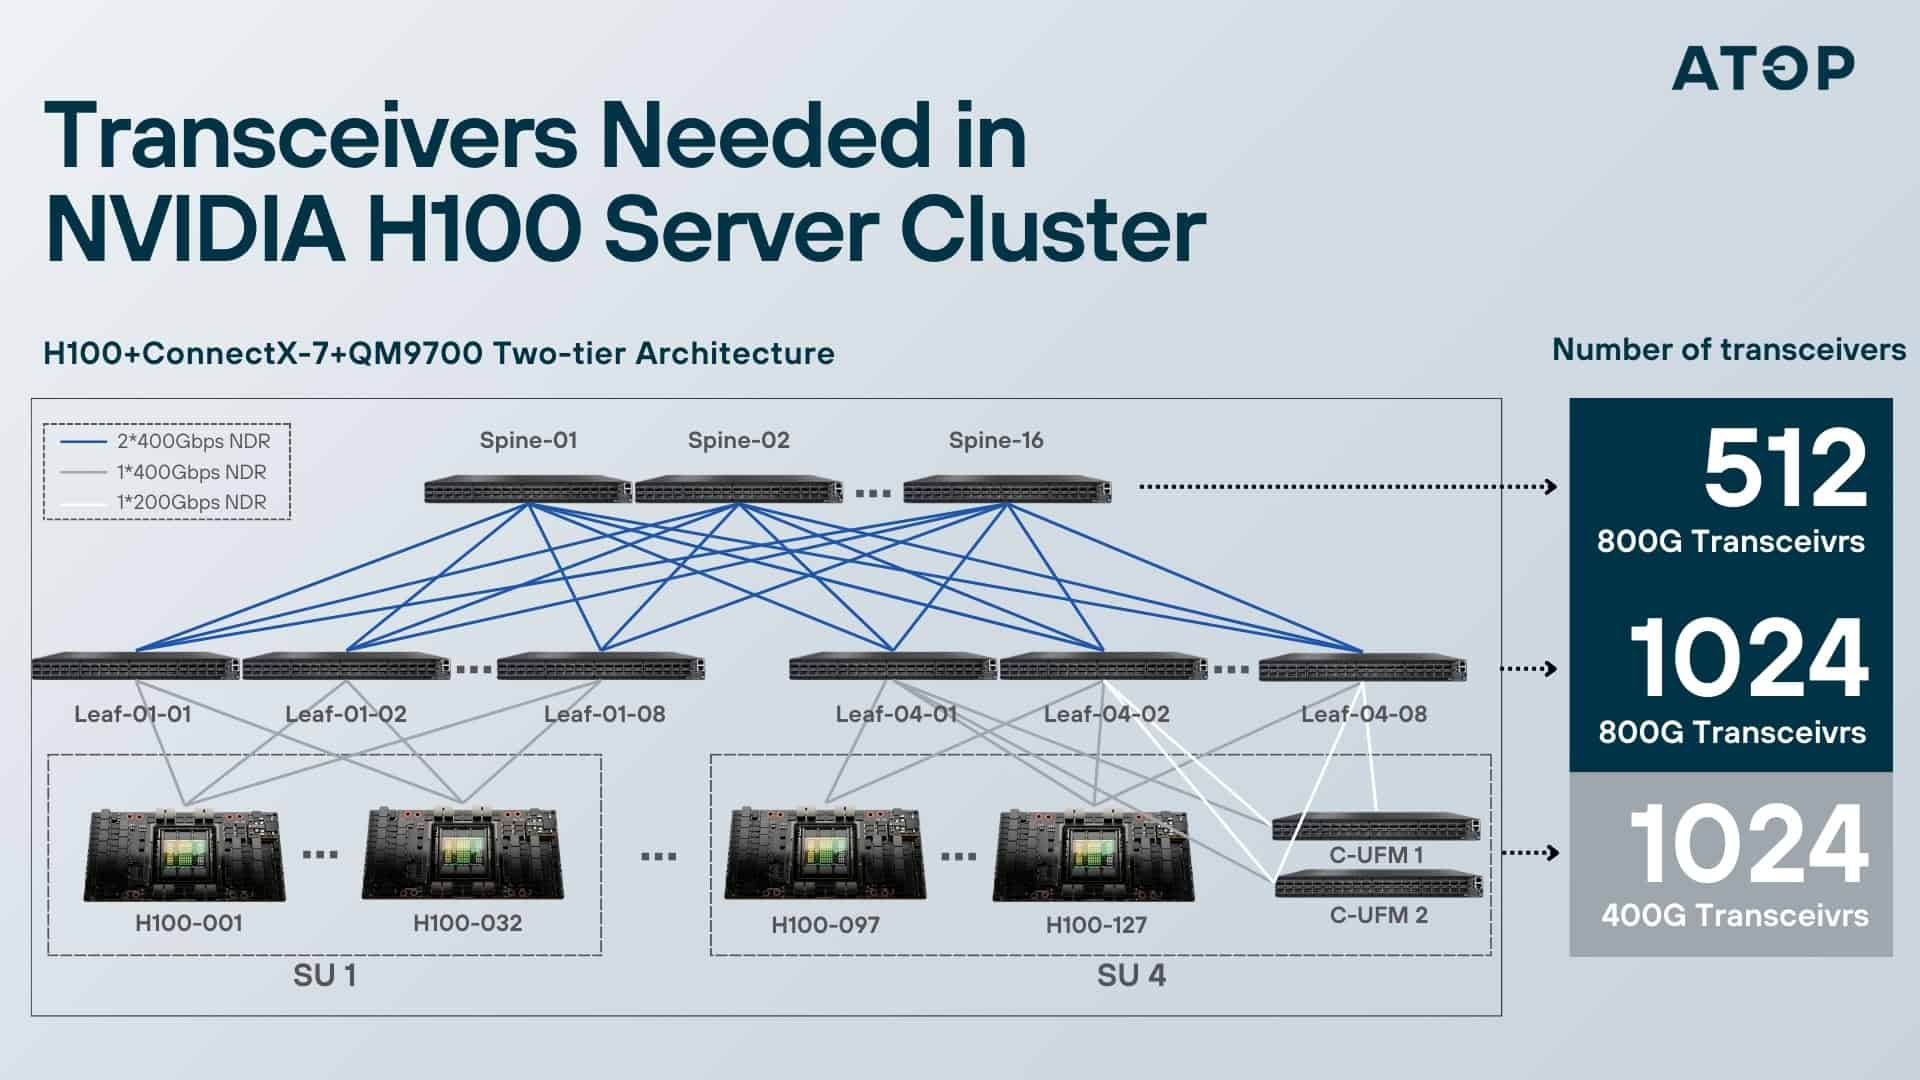 Transceivers Needed in NVIDIA H100 Server Cluster